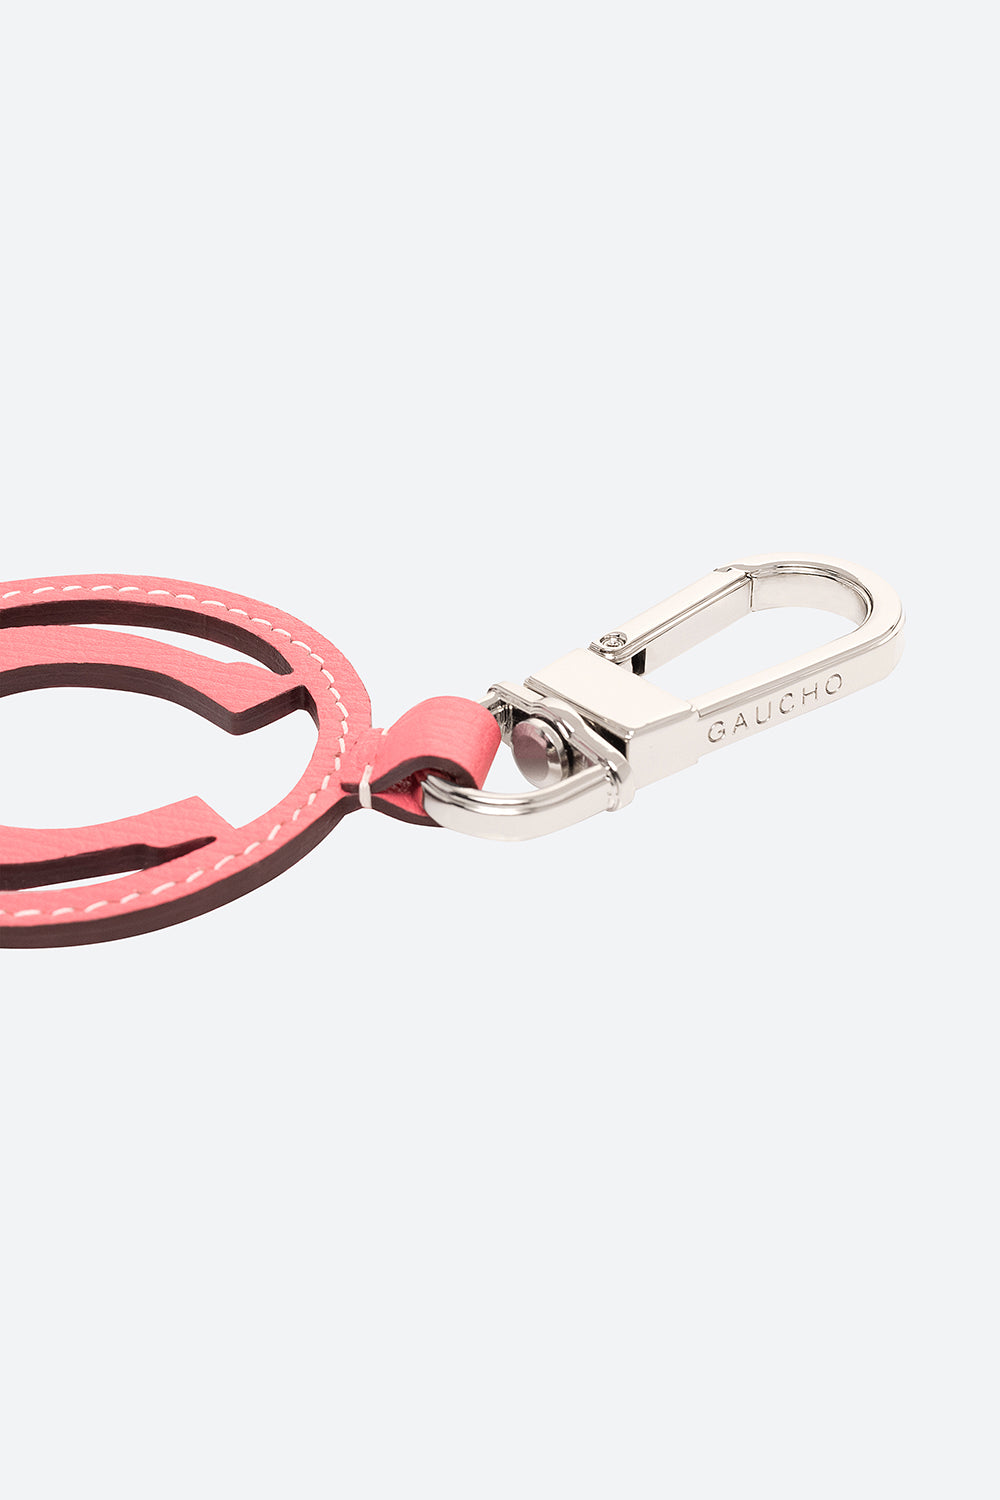 Lucky Horseshoe Charm in Pink